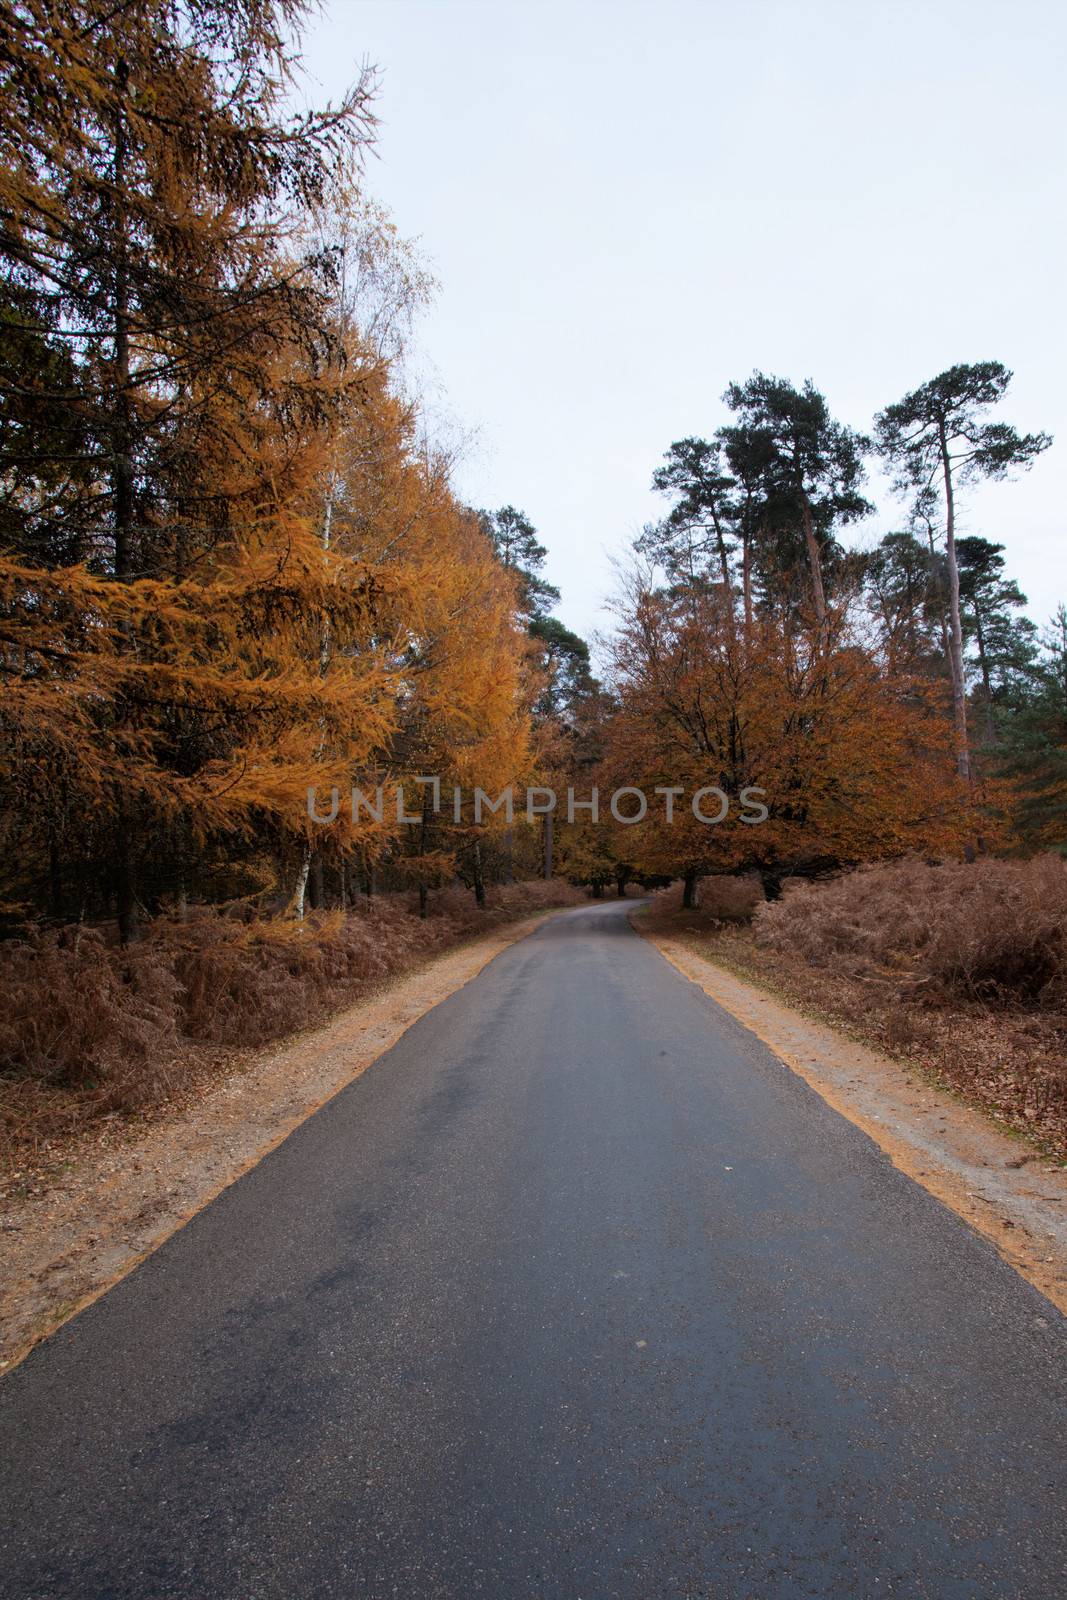 The road through the forest by olliemt